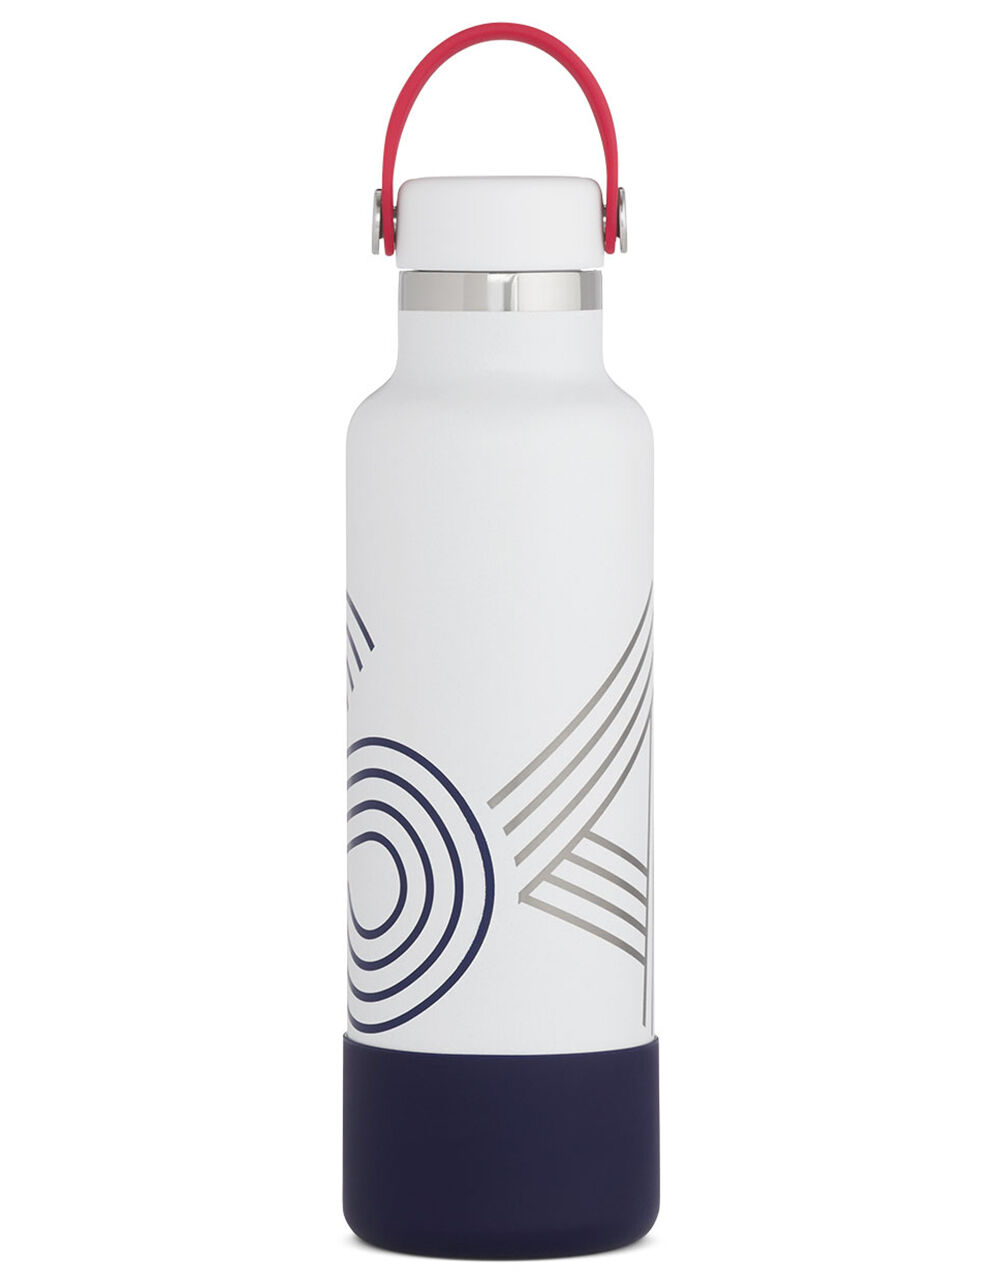 Limited Edition Hydro Flask 21 Oz Standard Mouth Bonfire